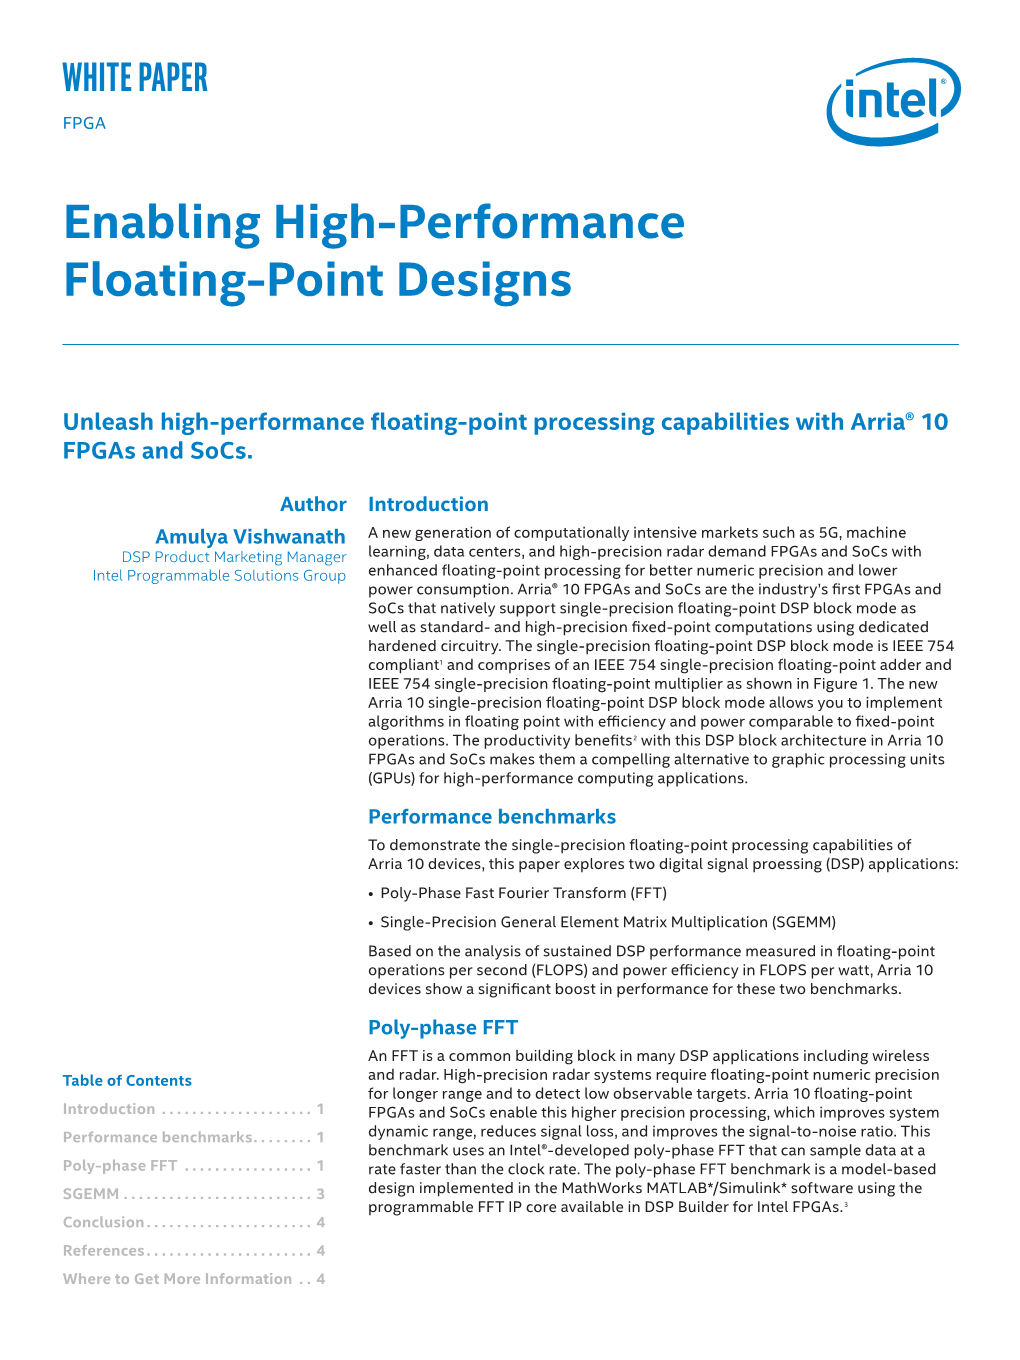 Enabling High-Performance Floating-Point Designs